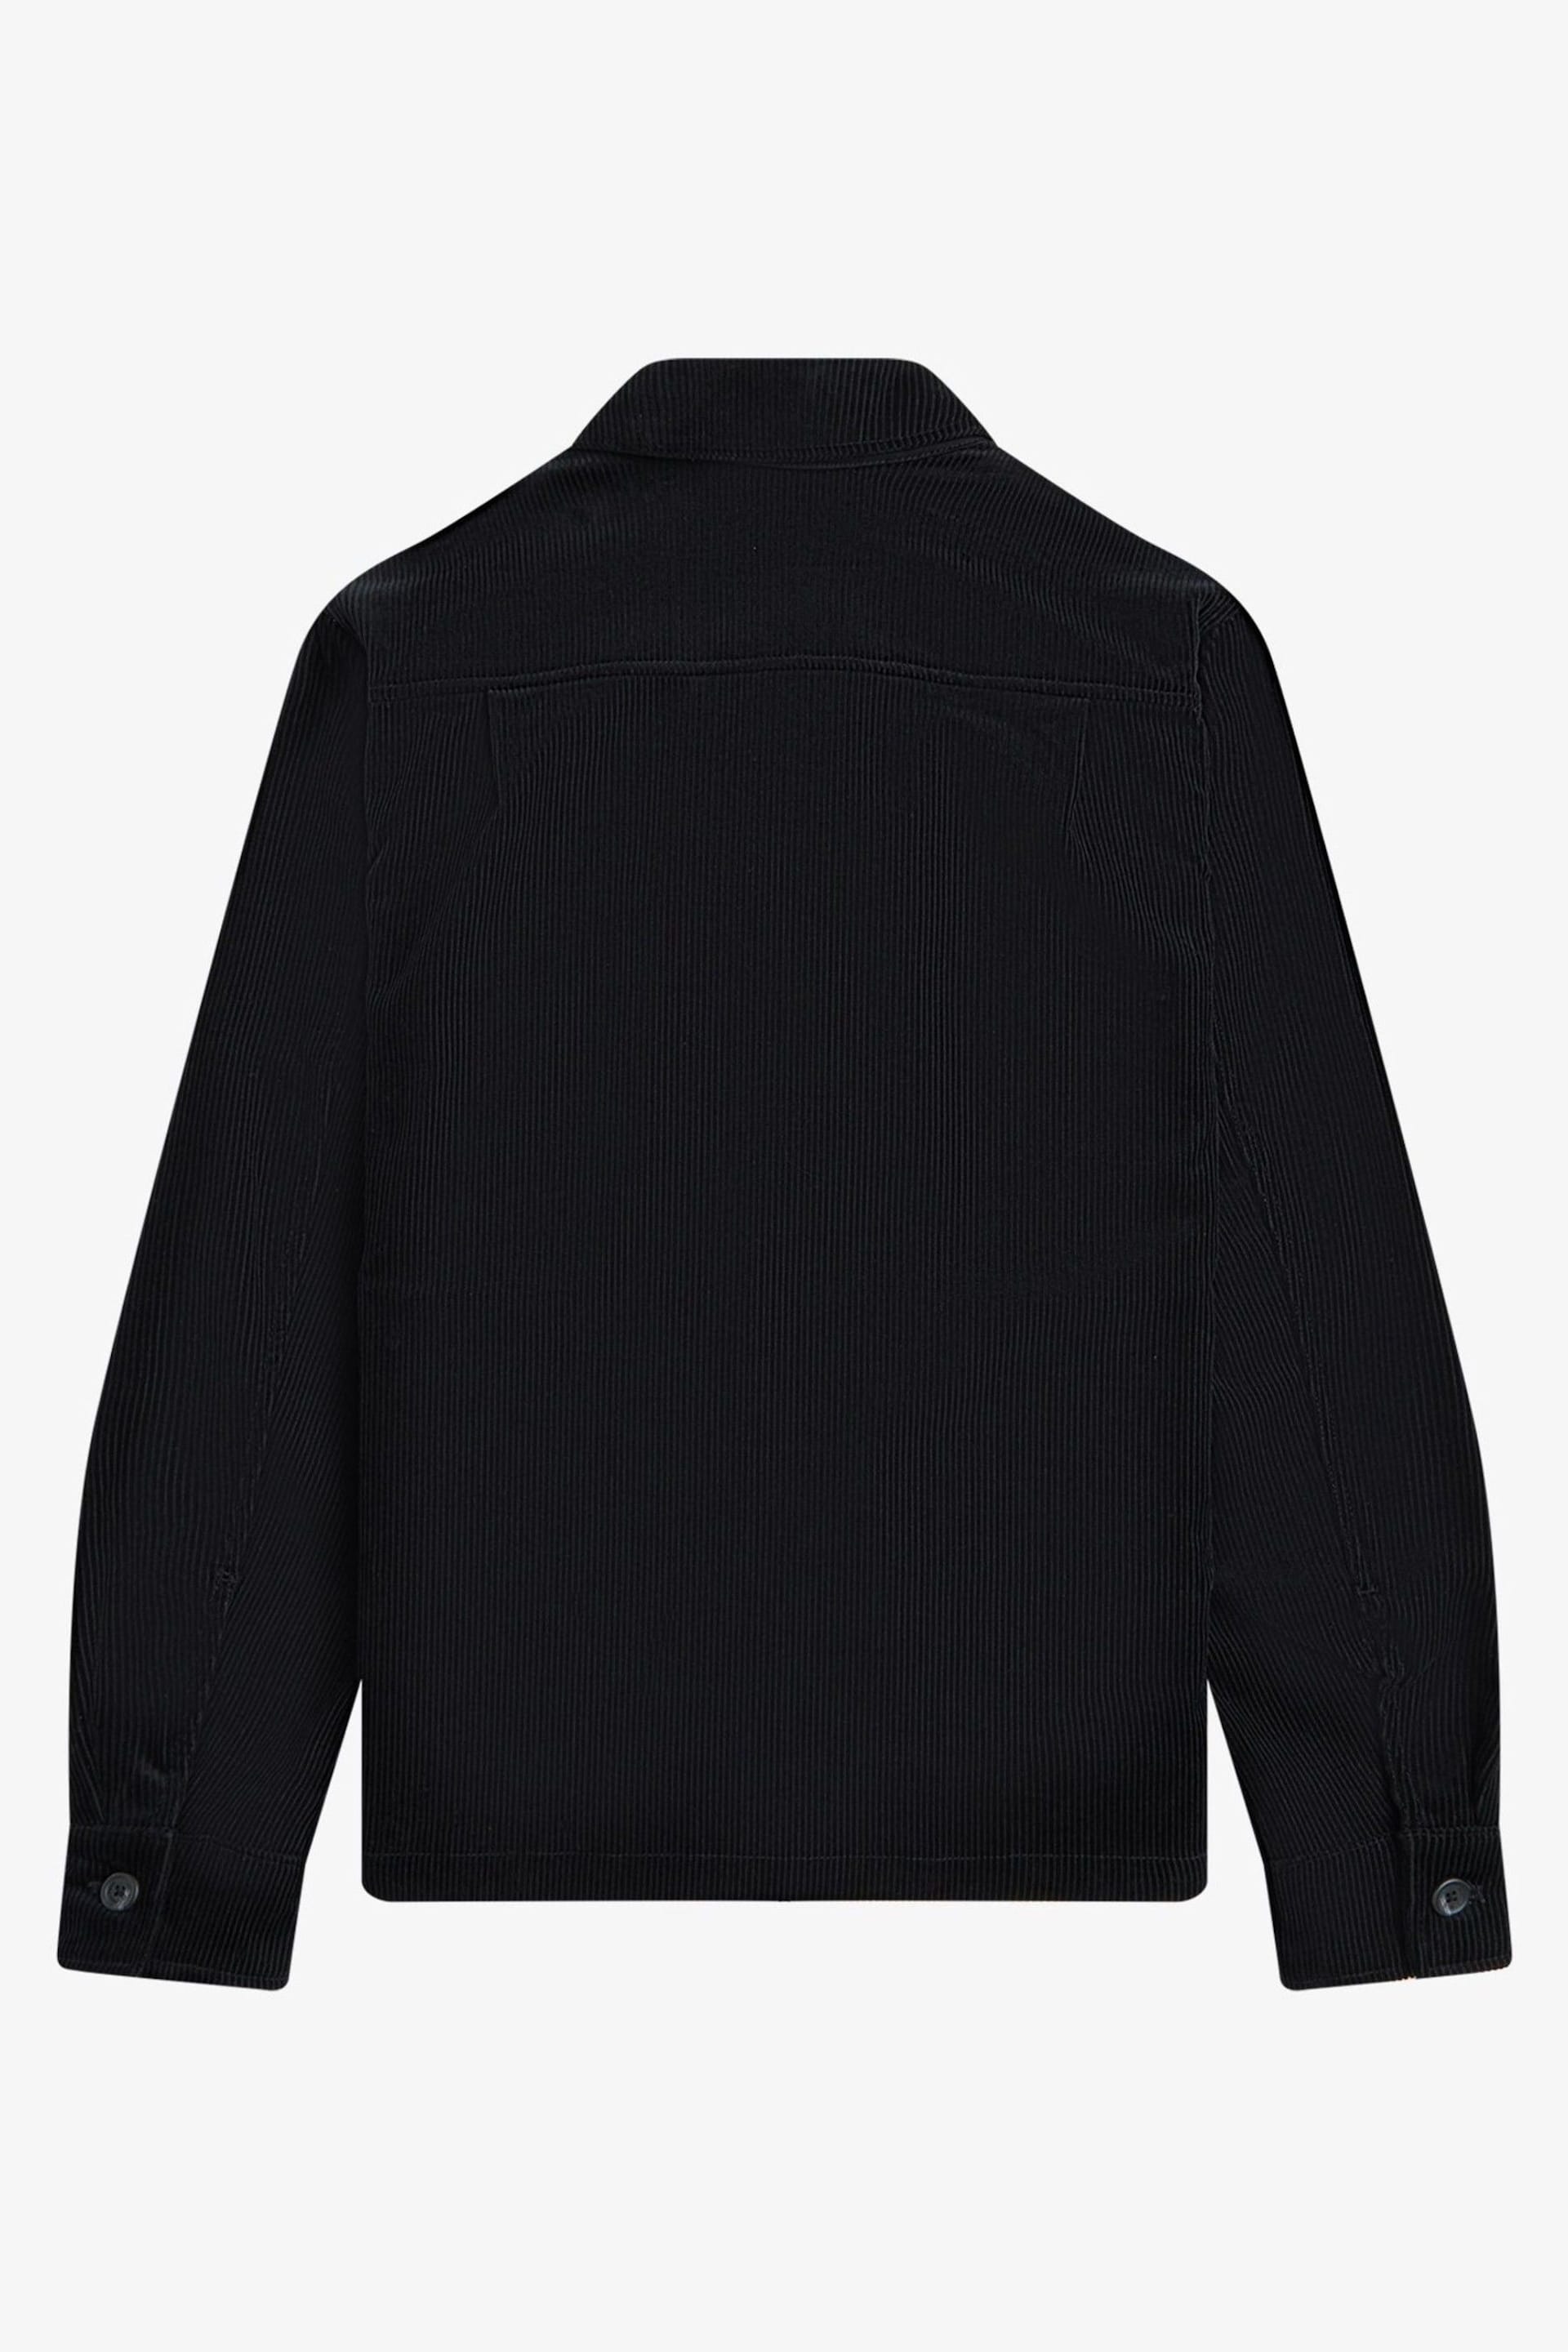 Fred Perry Cord Black Overshirt - Image 4 of 4